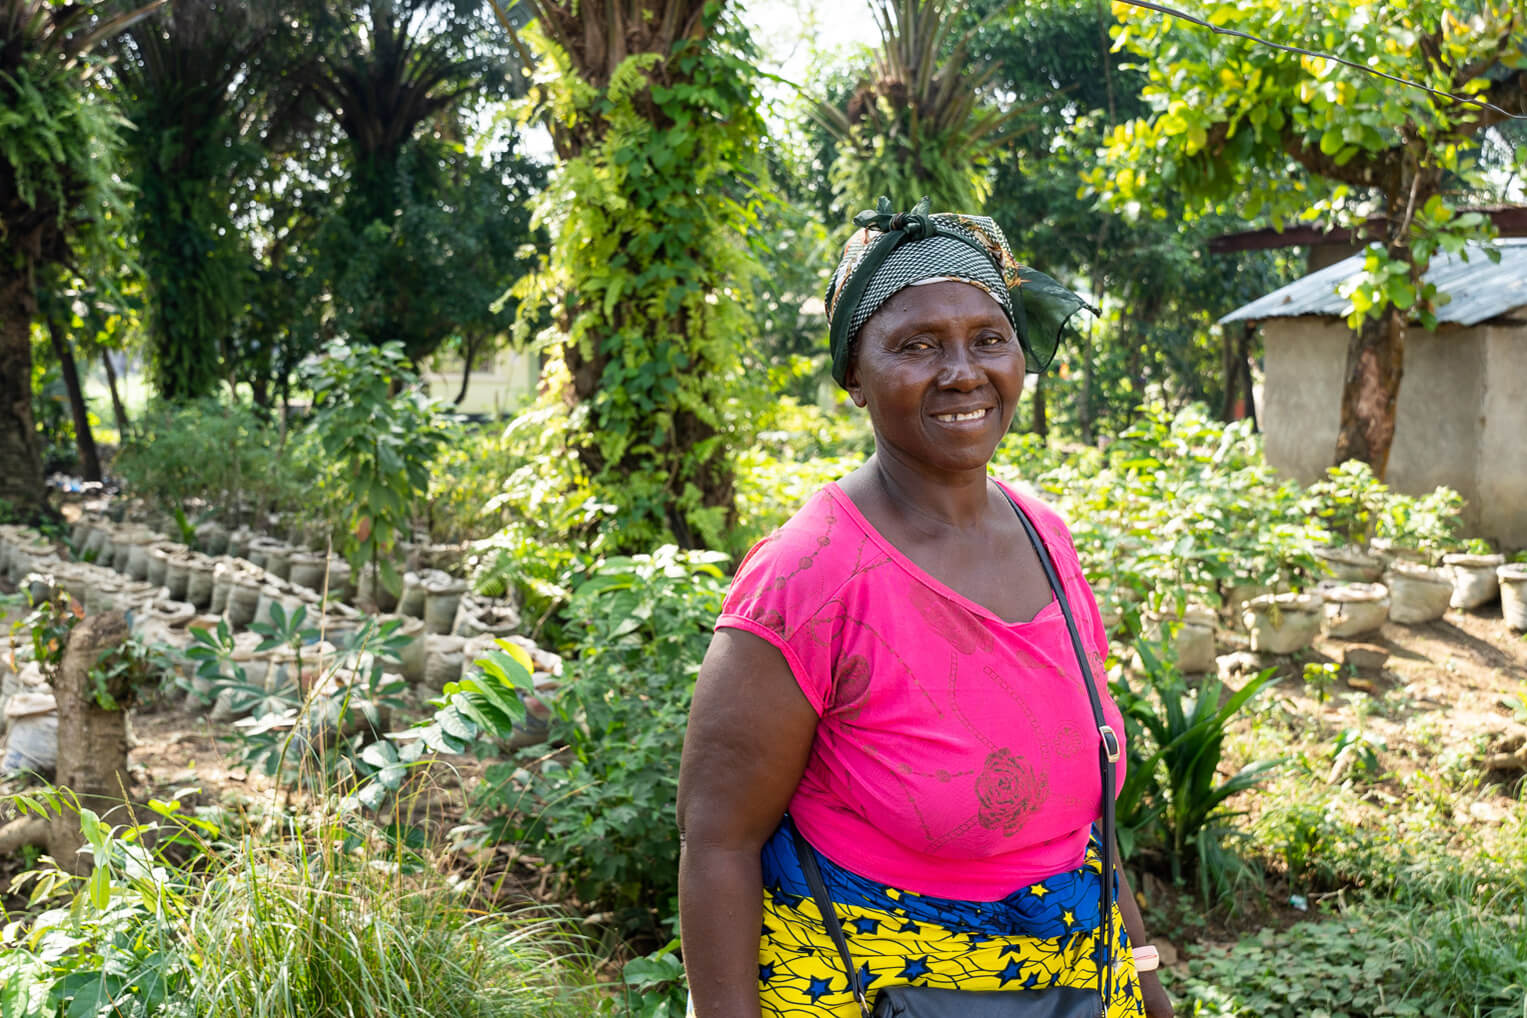 Korpo, a single mother of two, is proud of the work of growing food for her family.